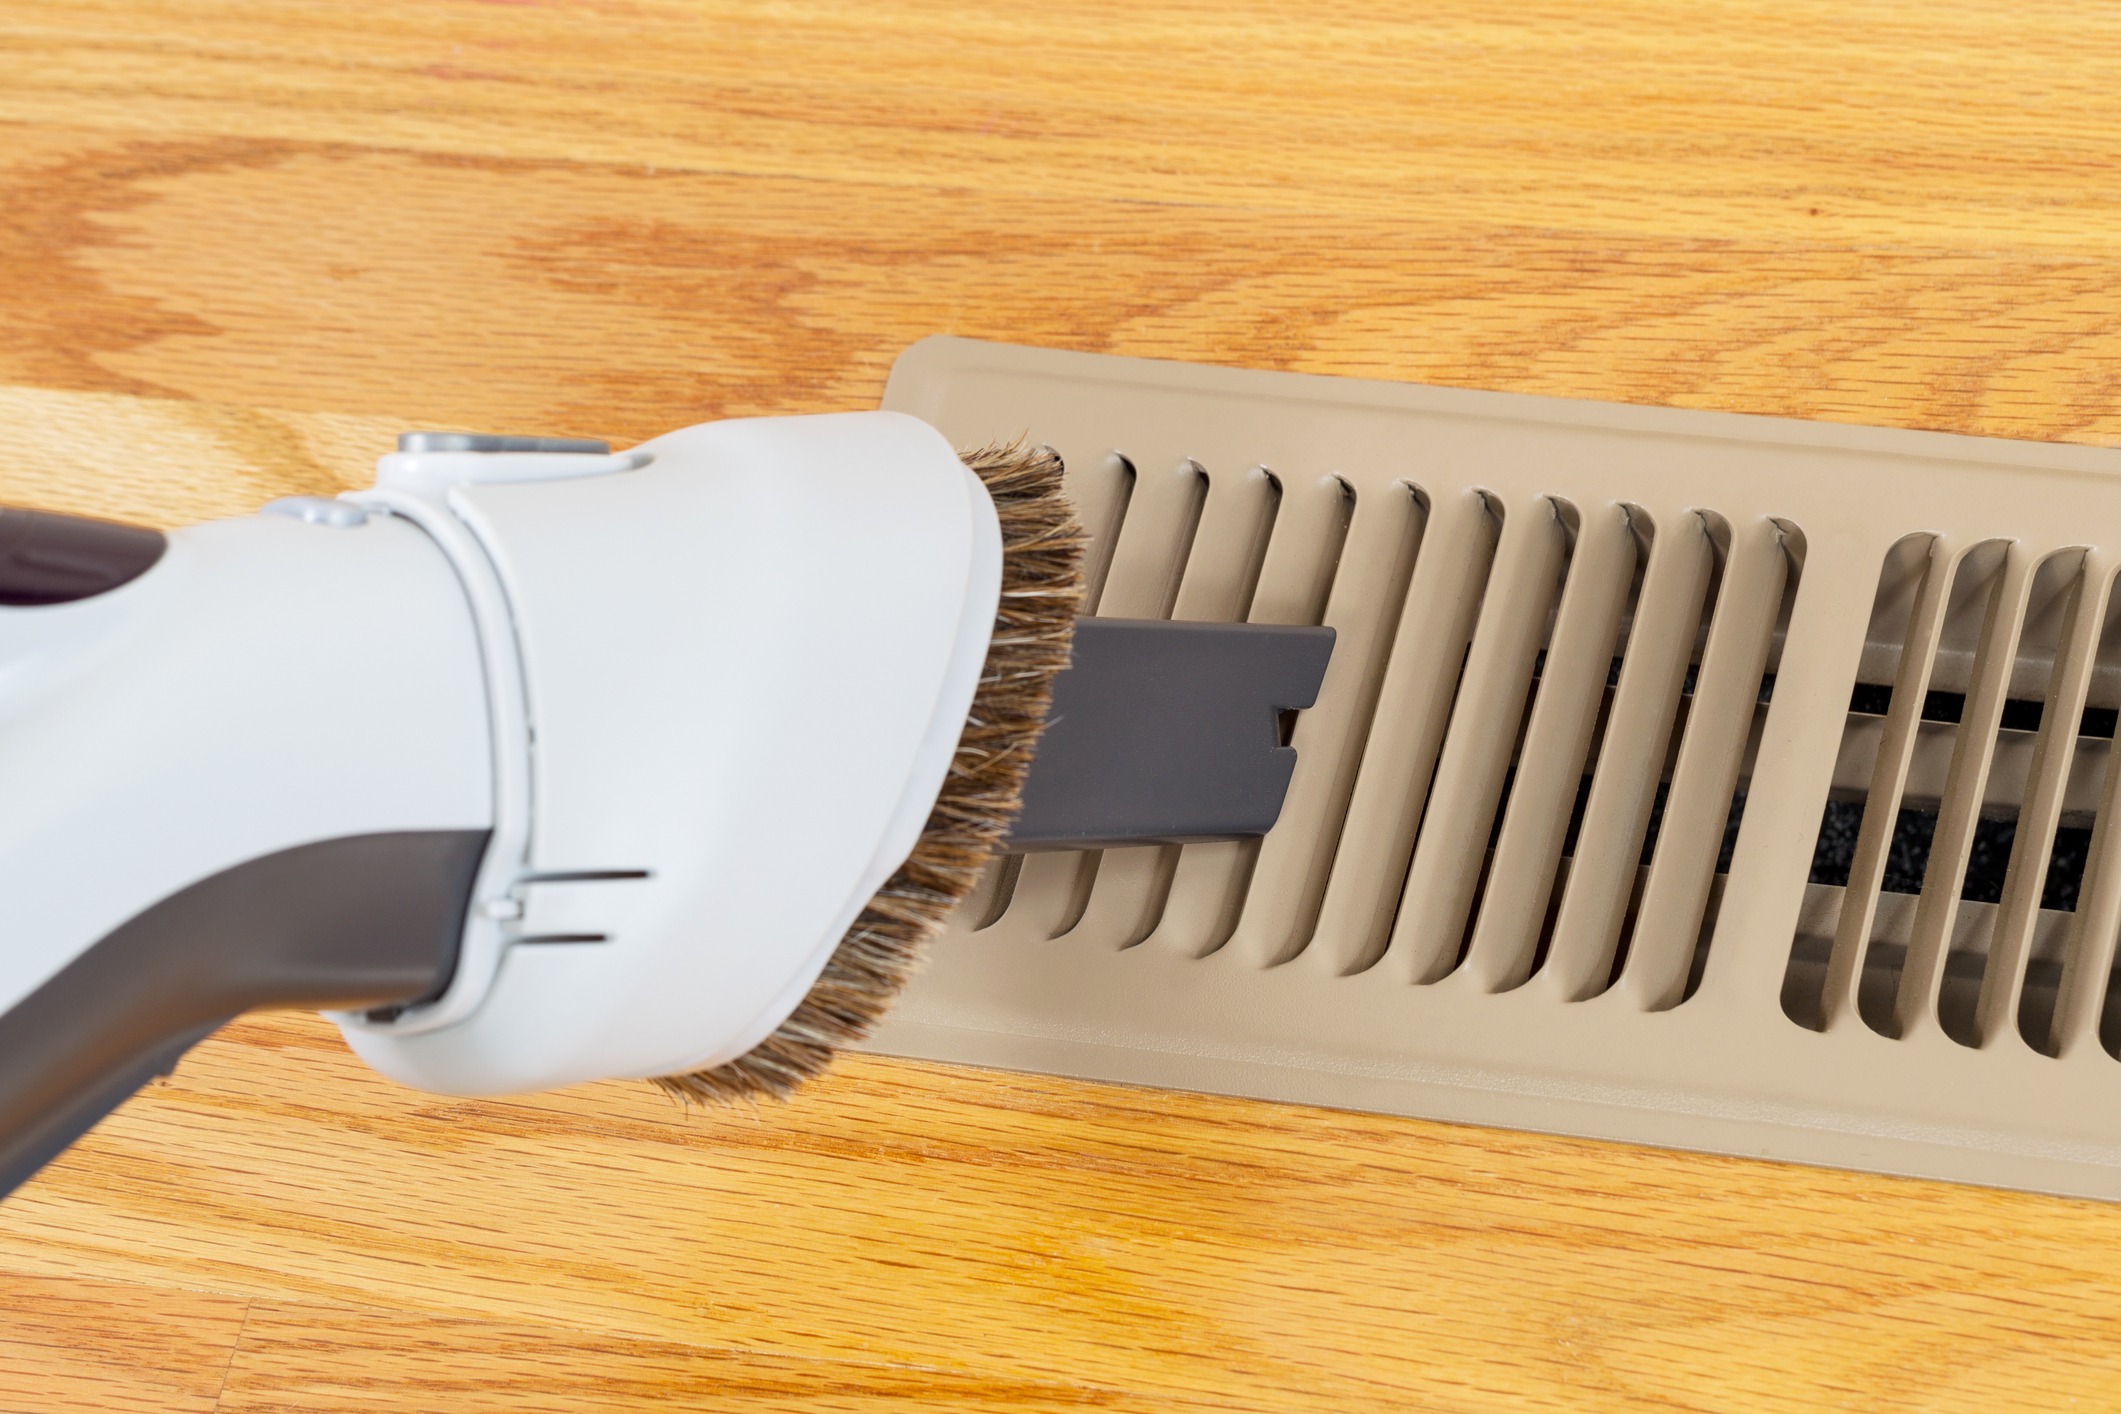 Your Vents Can Be Blocked Or Clogged, Causing Poor Air Flow